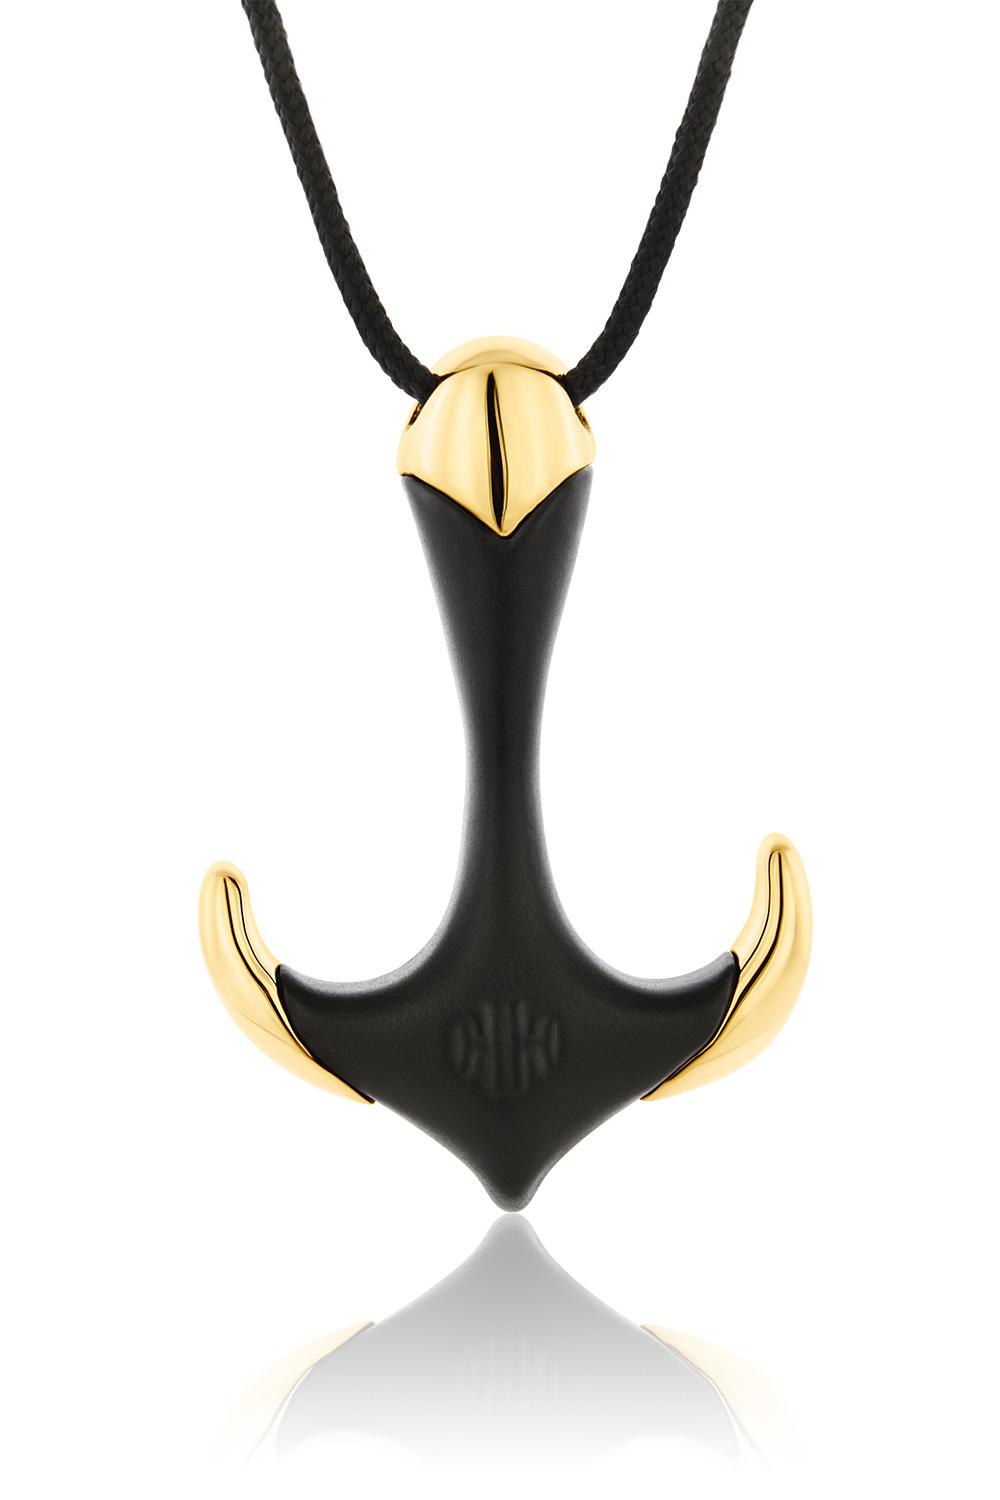 honor anchor black gold necklace honorp138 image1